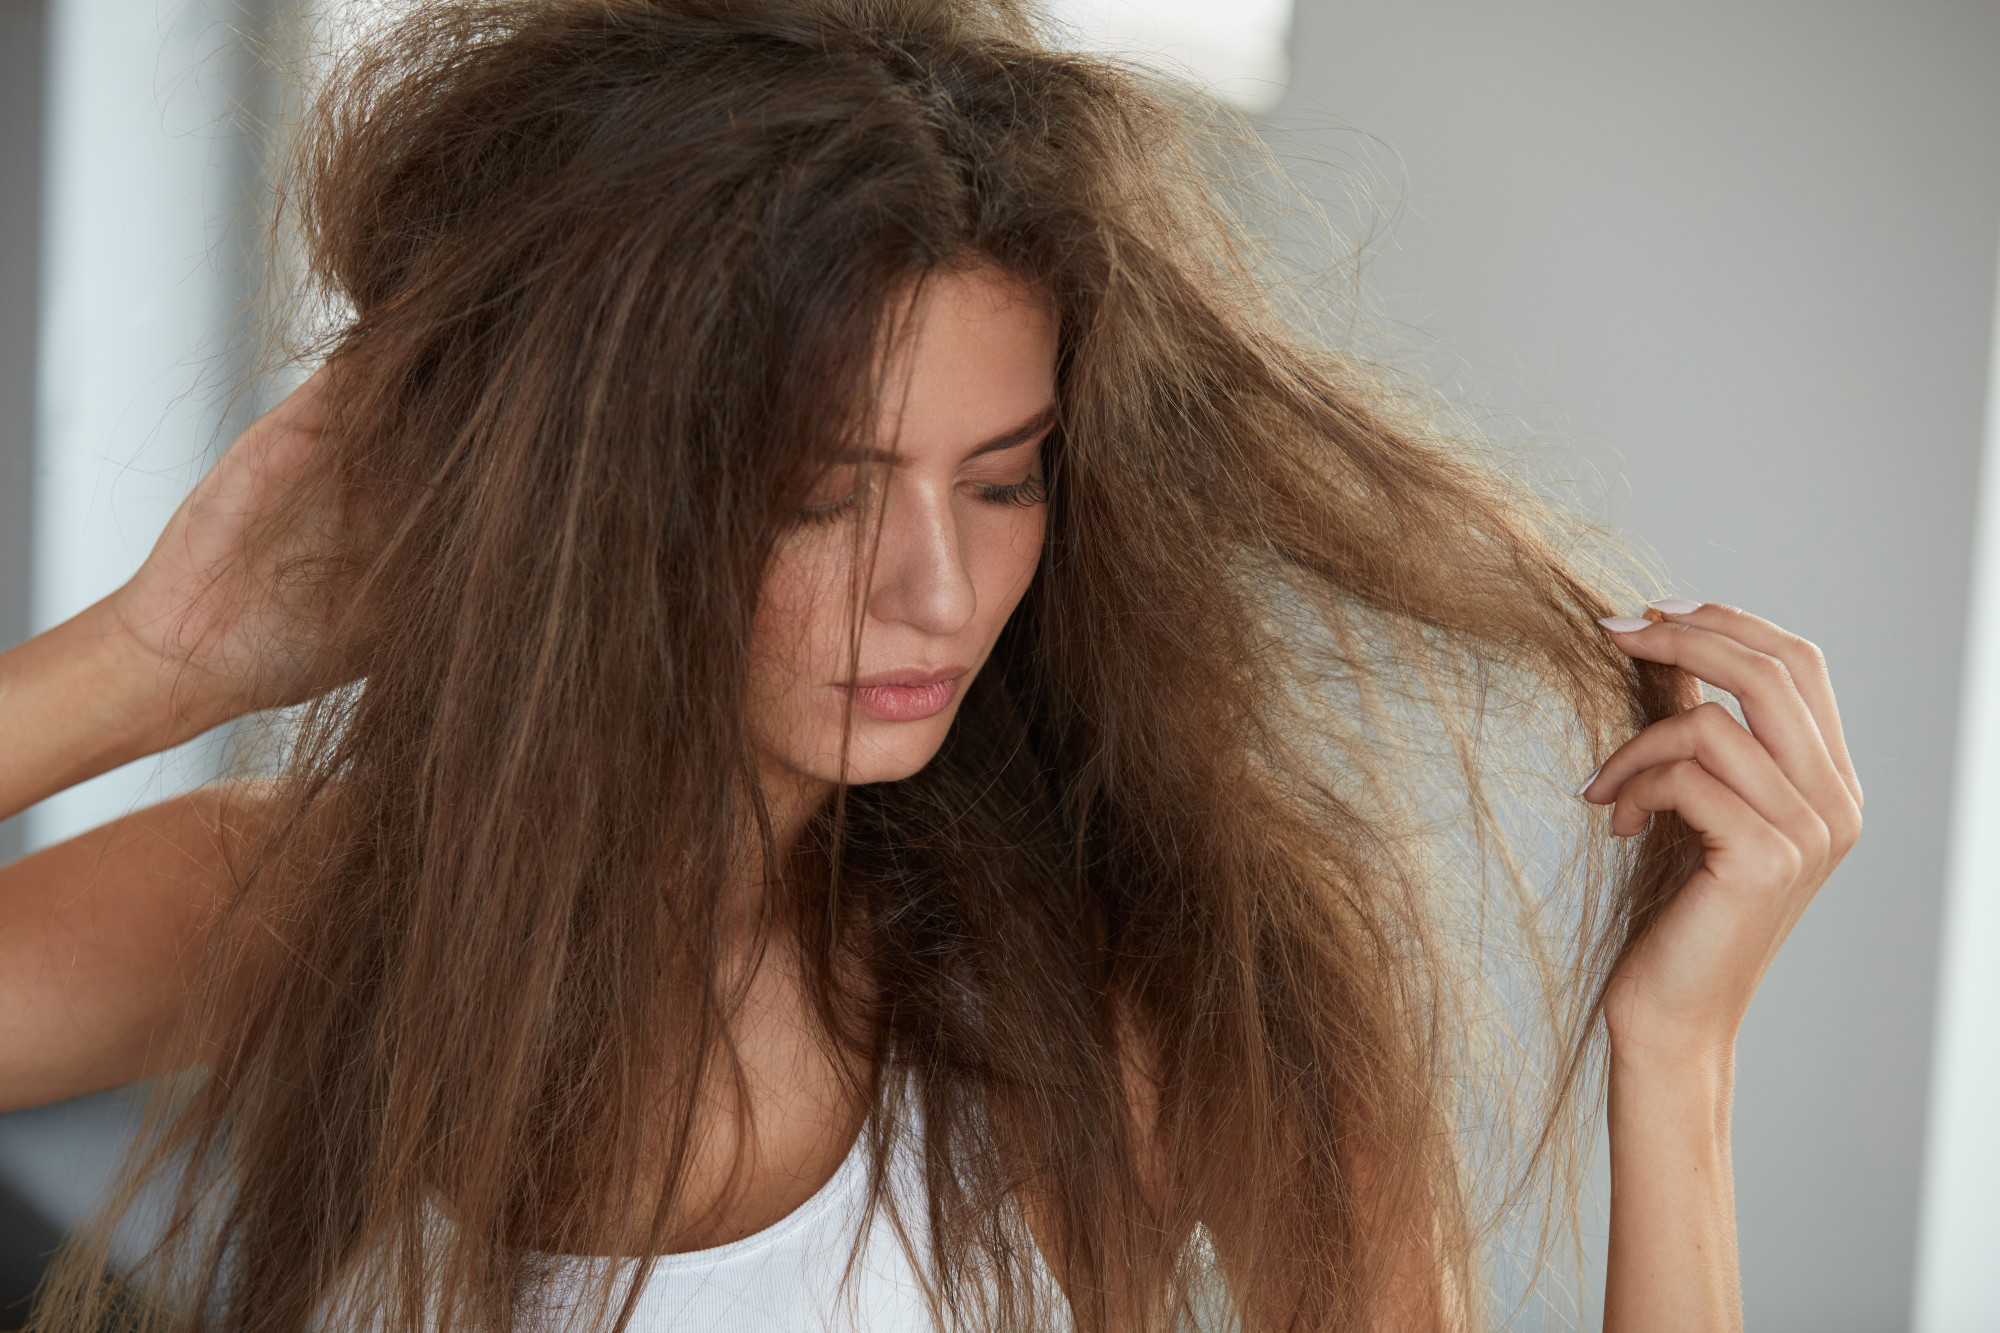 5 Tips for Managing Your Hair in Humid Weather